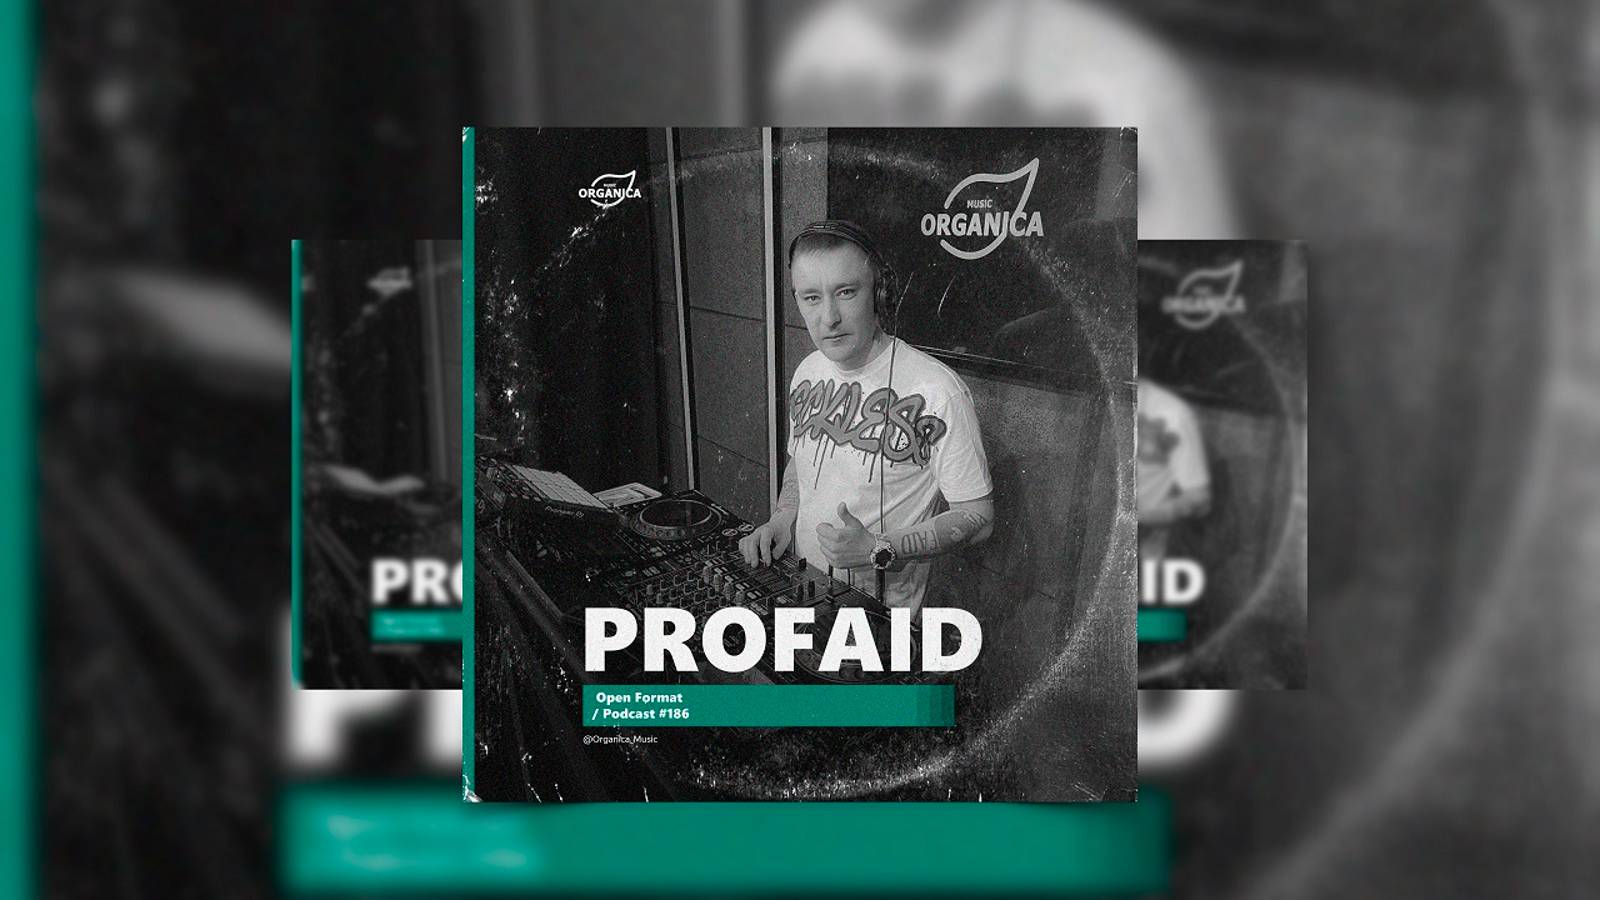 Organicа Music - by Profaid @Organica_Music / Open Format Podcast #186